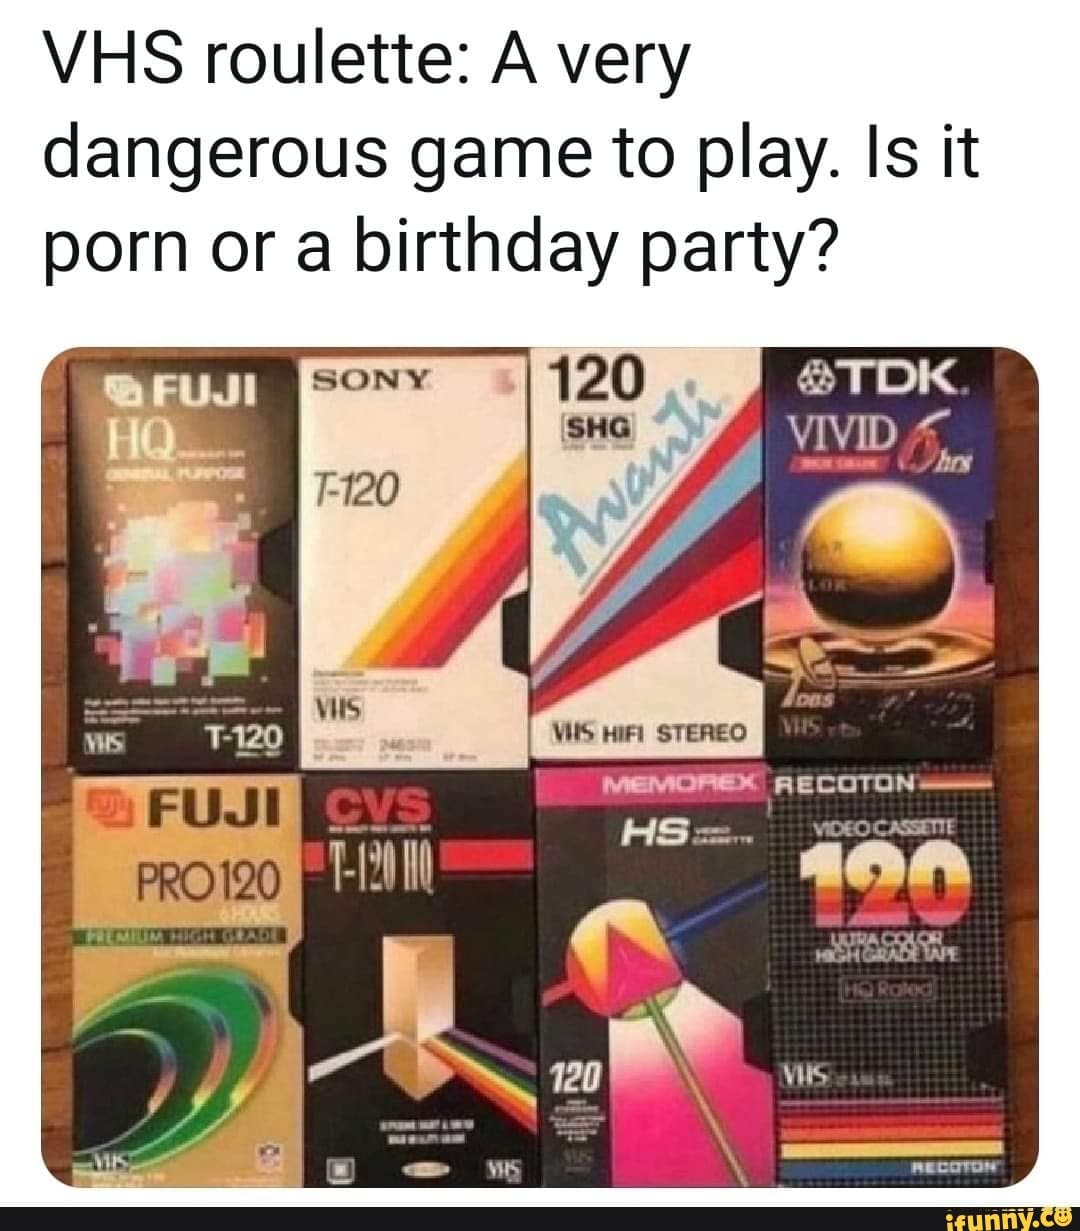 1080px x 1231px - VHS roulette: A very dangerous game to play. Is it porn or a birthday  party? SONY 120 @TDK VIVID ,RECOTON HS. - iFunny Brazil